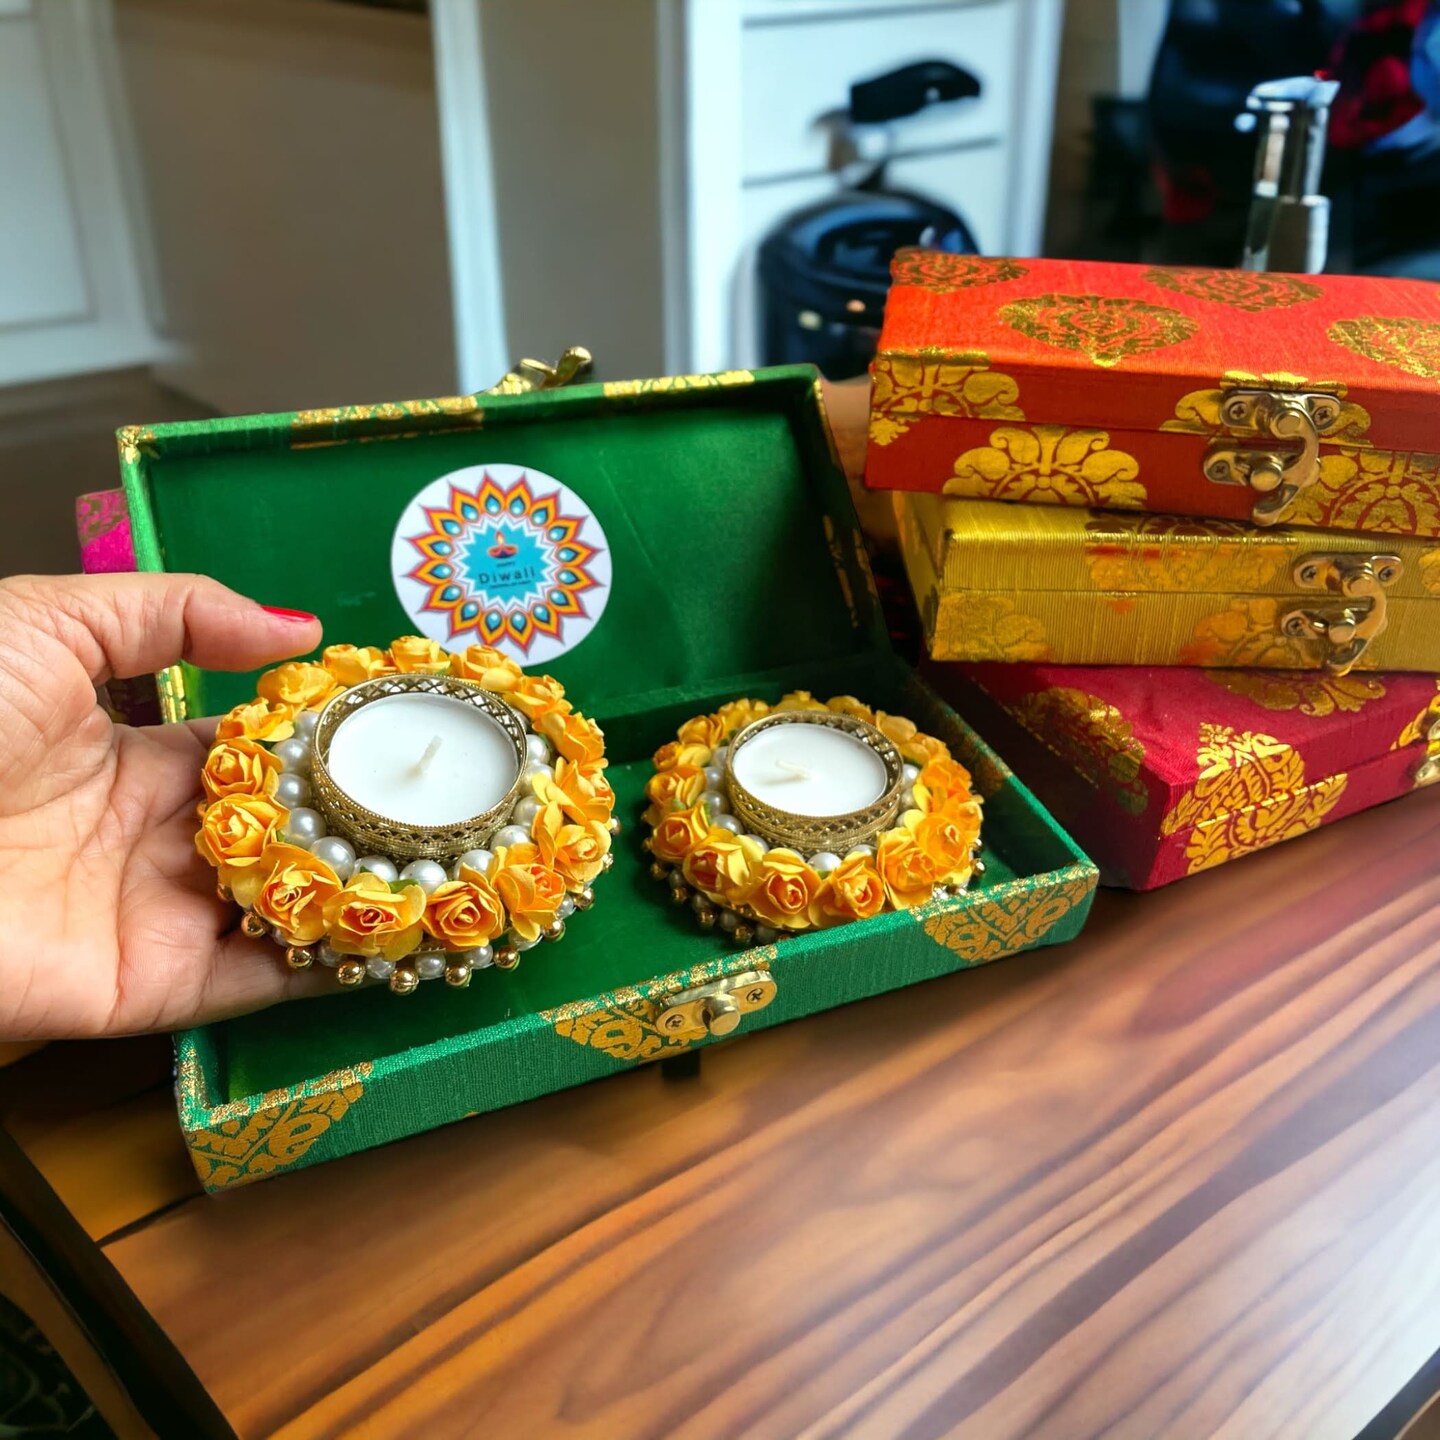 Diwali Gift Baskets: Delightful Treats for Your Loved Ones